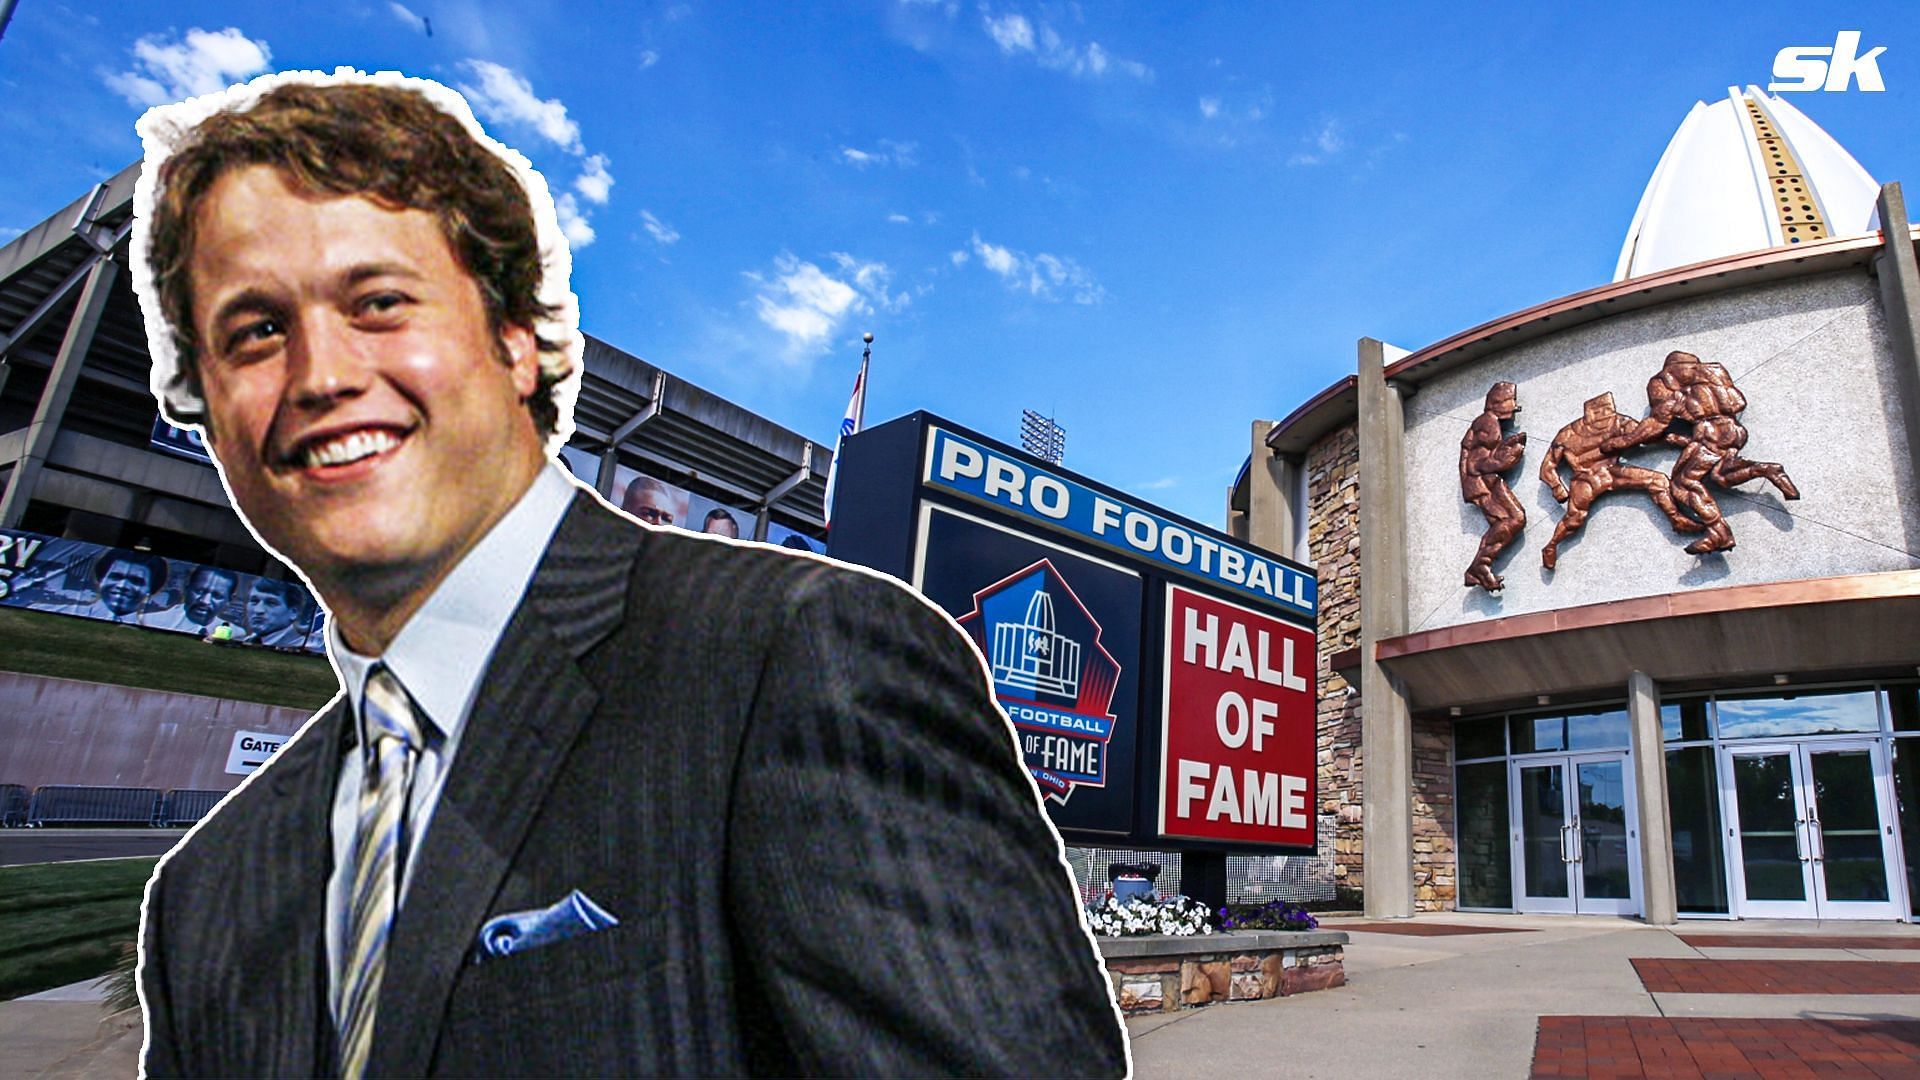 Does Matthew Stafford deserve to be in the NFL Hall of Fame? 